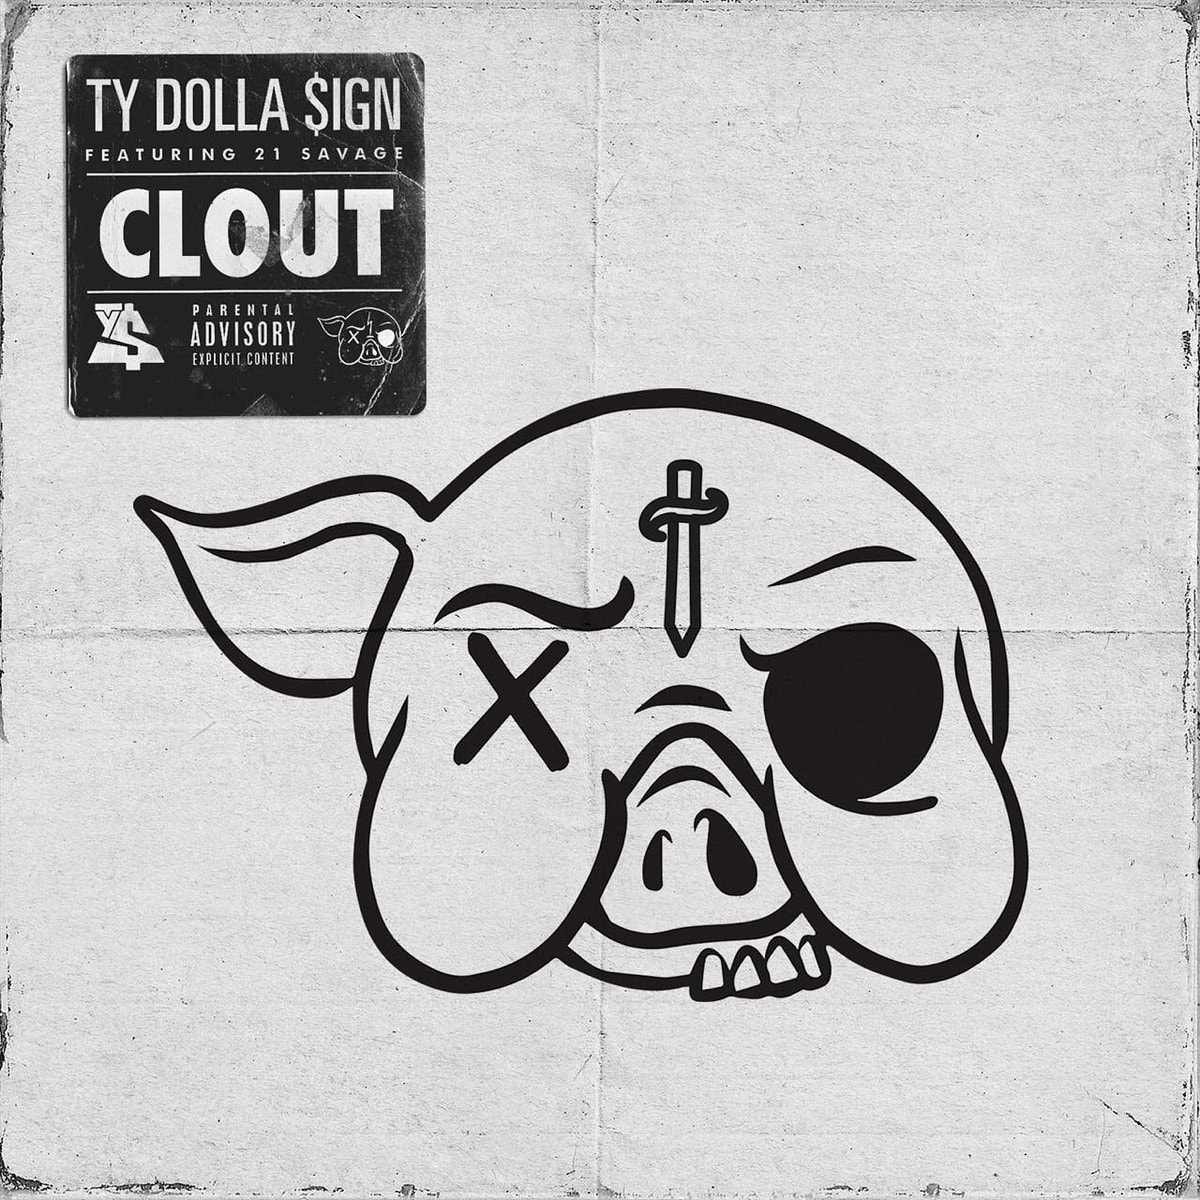 Ty Dolla Sign 21 Savage Clout Single stream may 9 2018 release date info drop debut premiere spotify